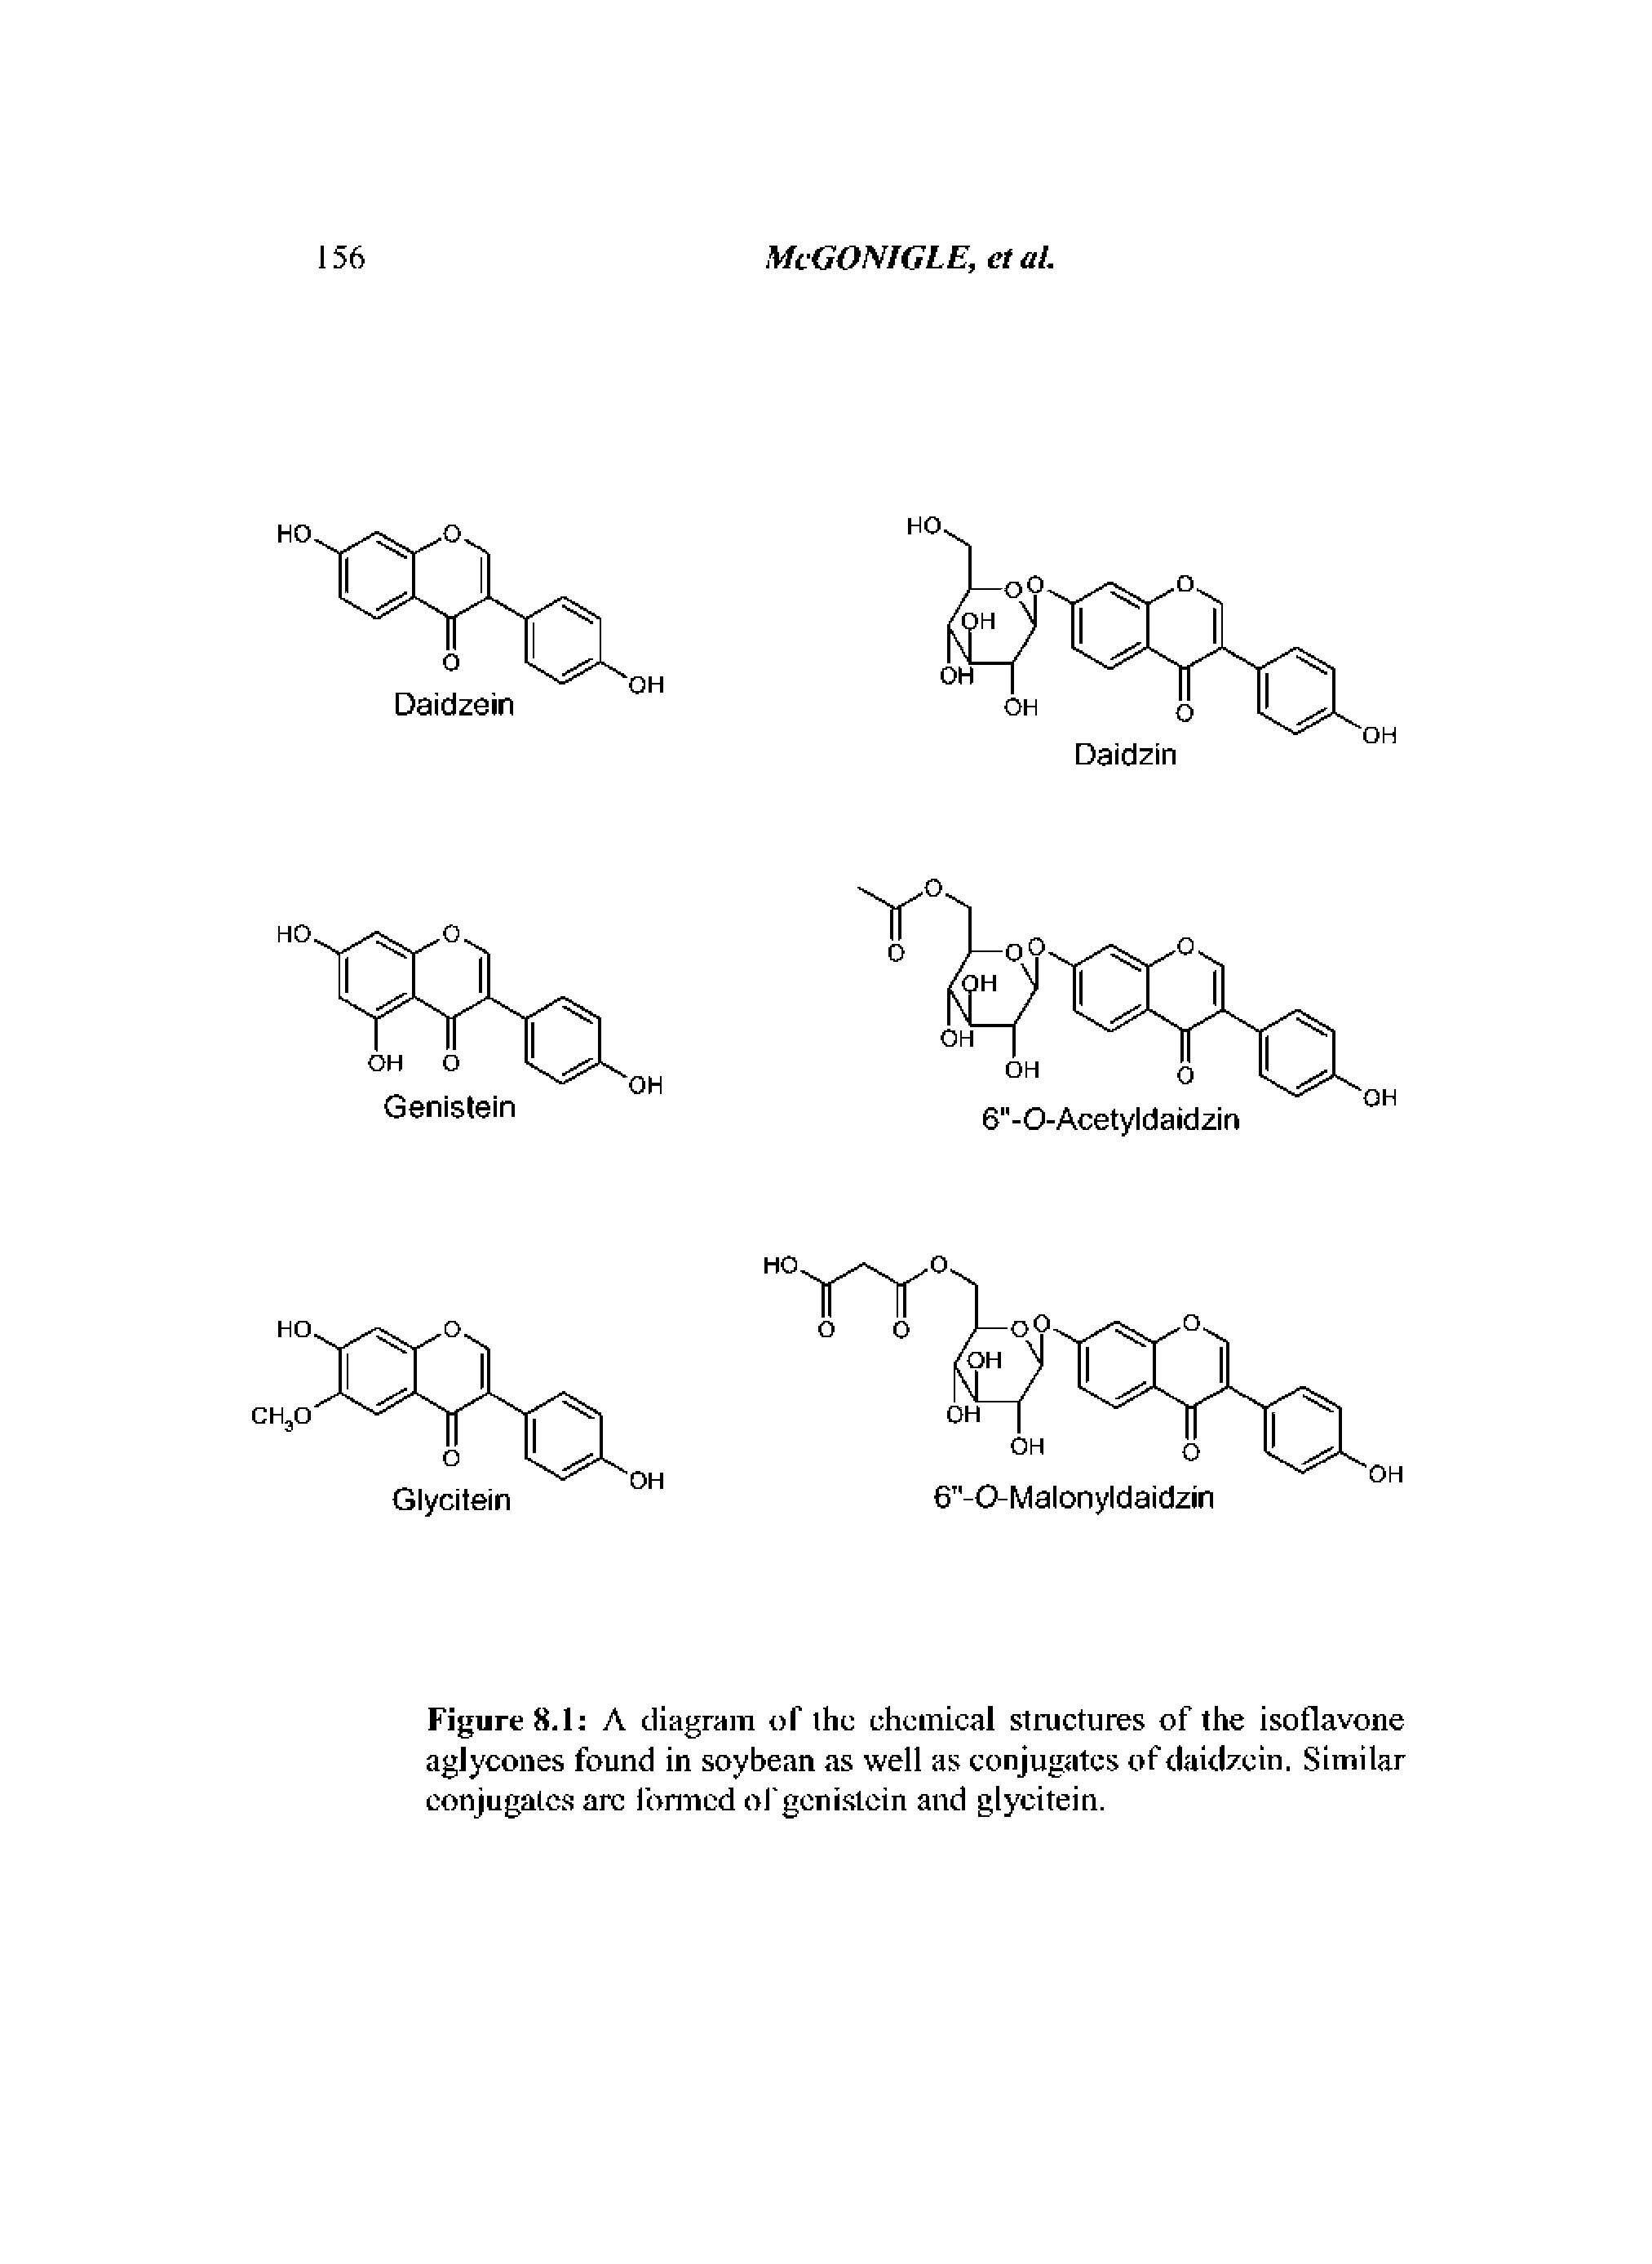 Figure 8.1 A diagram t)T ihc chemical structures of the isoflavone aglycones found in soybean as well as conjugates of daidzein. Similar conjugates arc fornicd of genistein and glycitein.